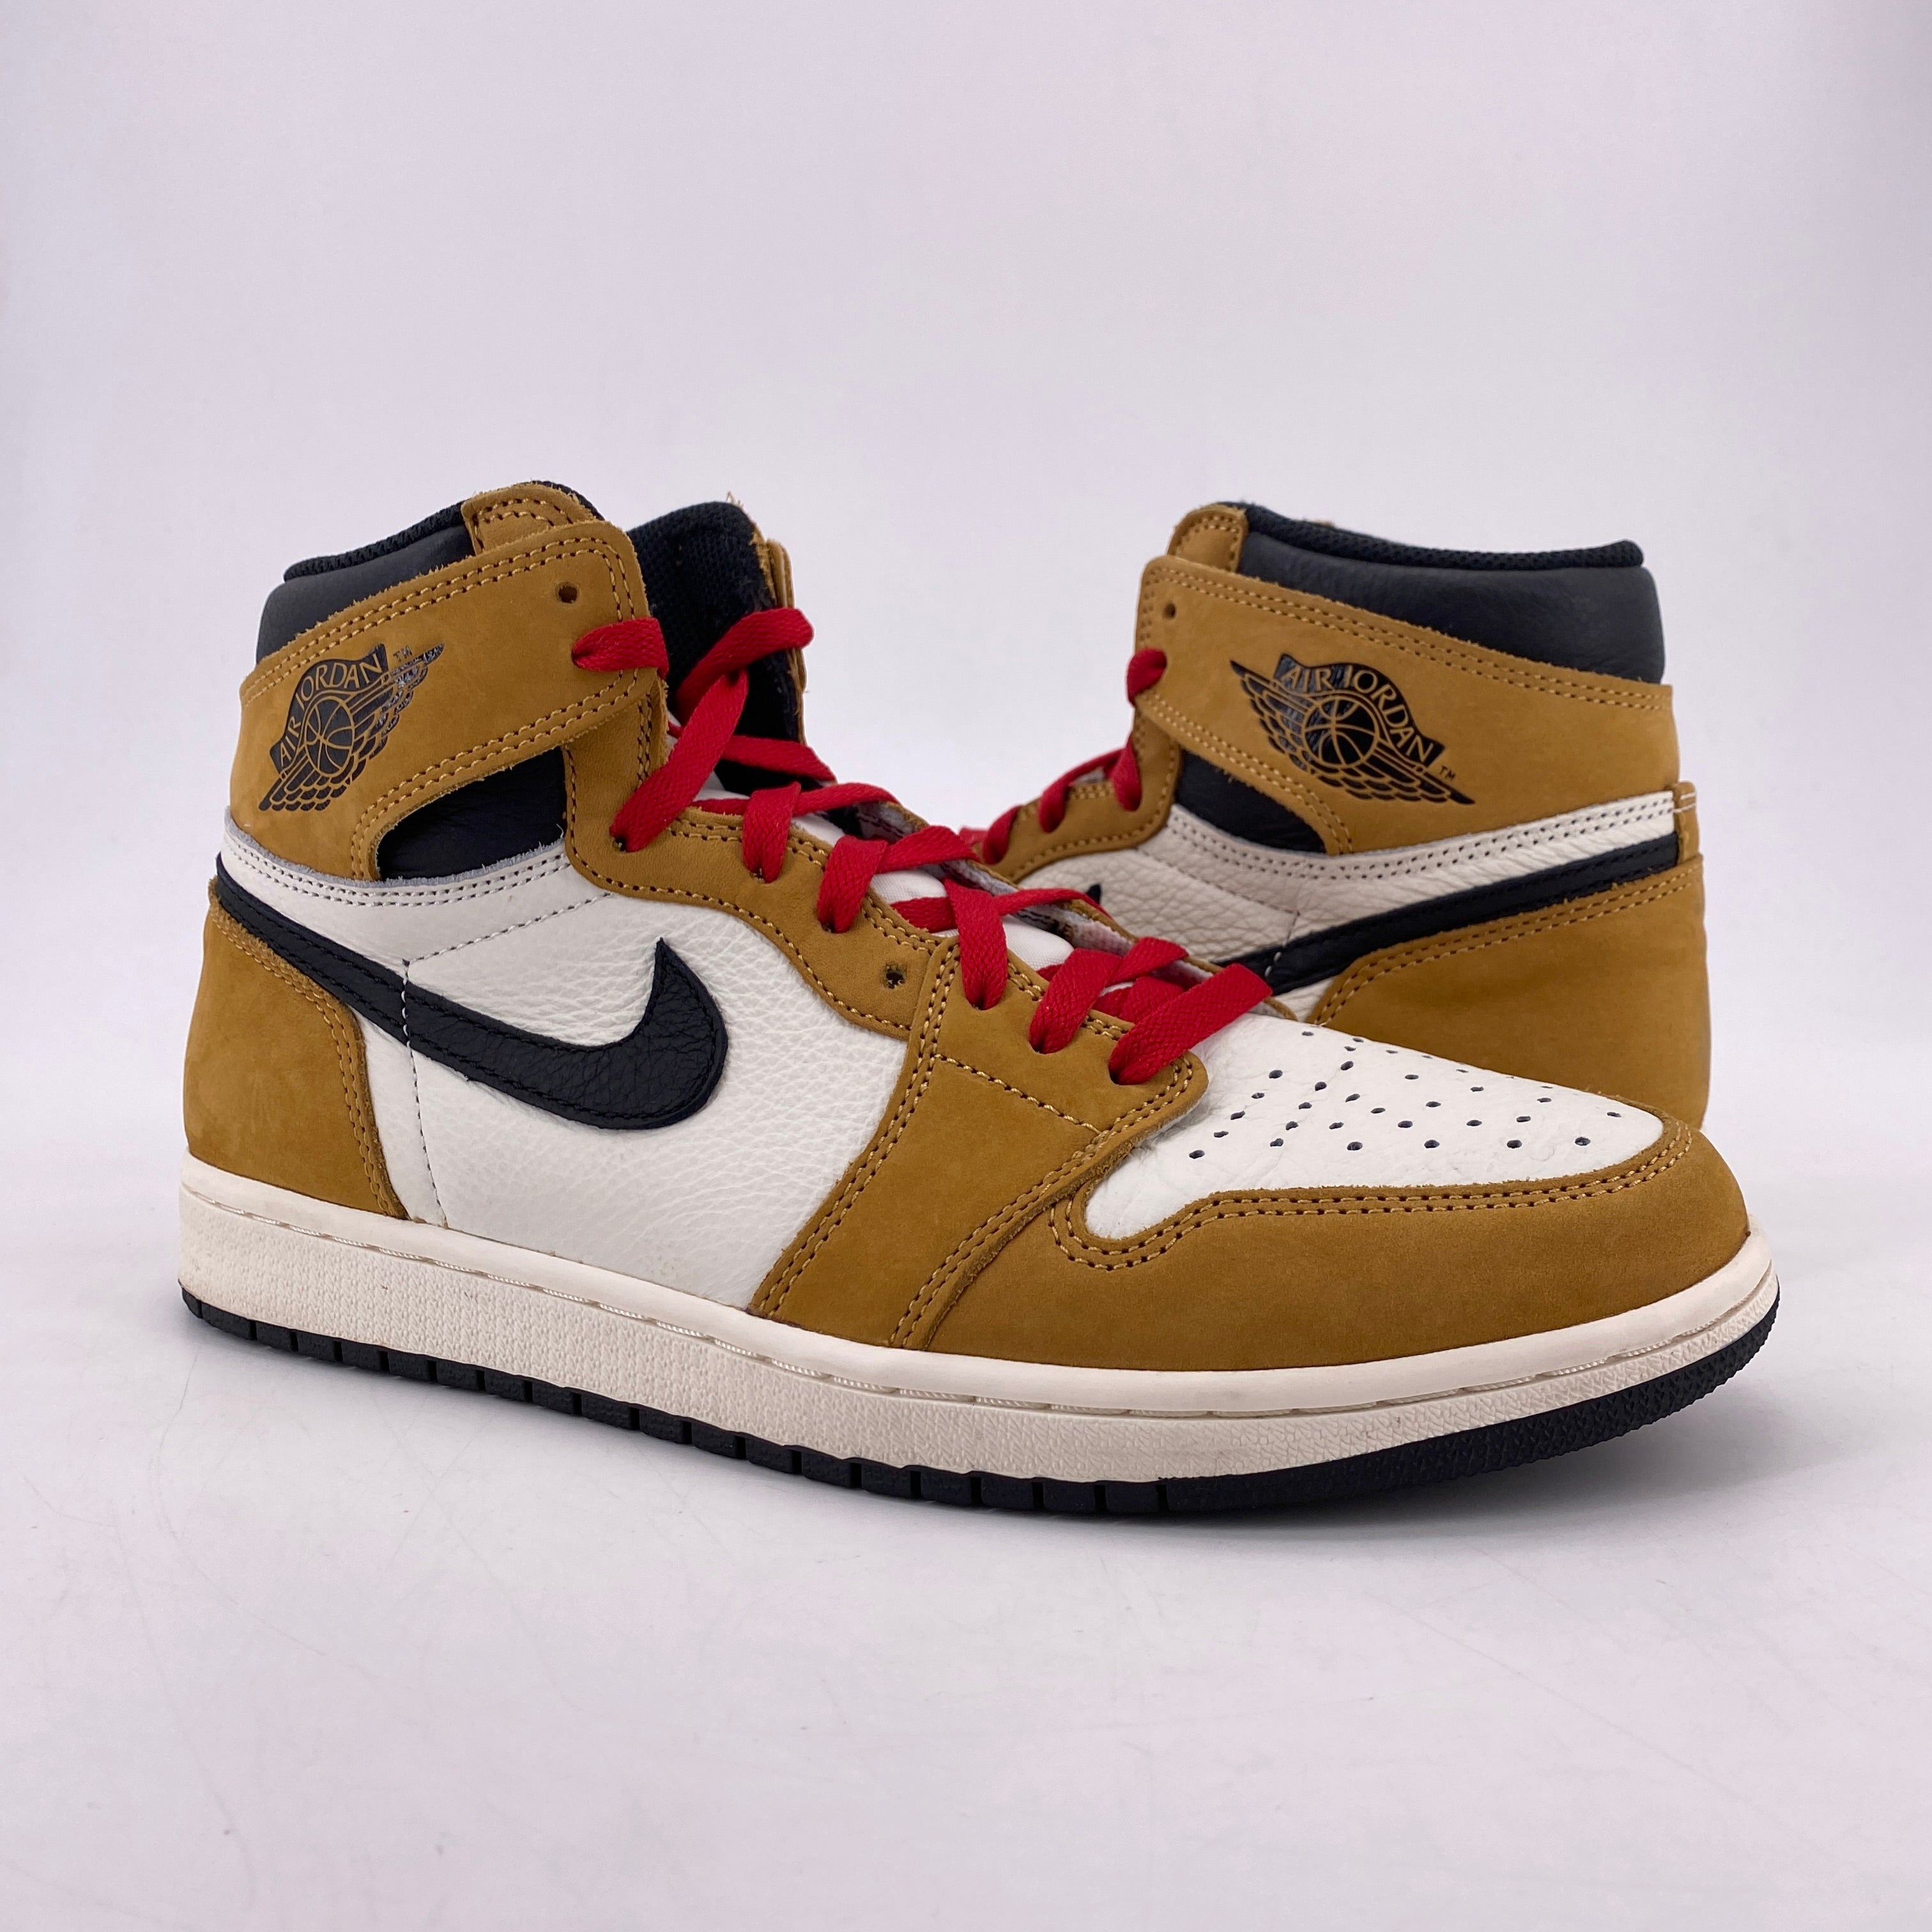 Air Jordan 1 Retro High OG &quot;Rookie Of The Year&quot; 2018 Used Size 9.5